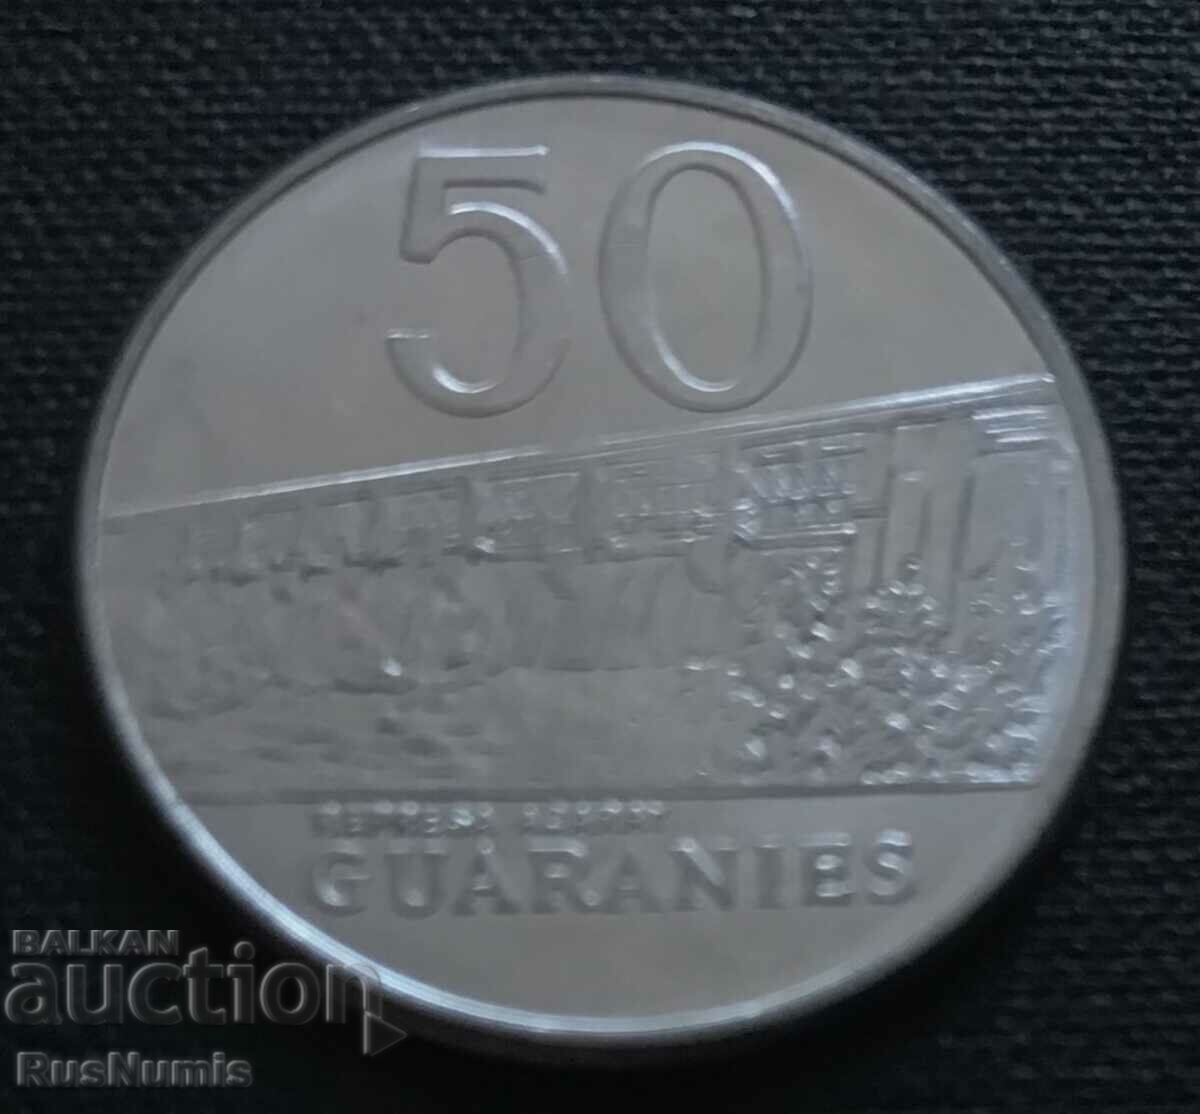 Парагвай. 50 гуарани 1986 г.  UNC.